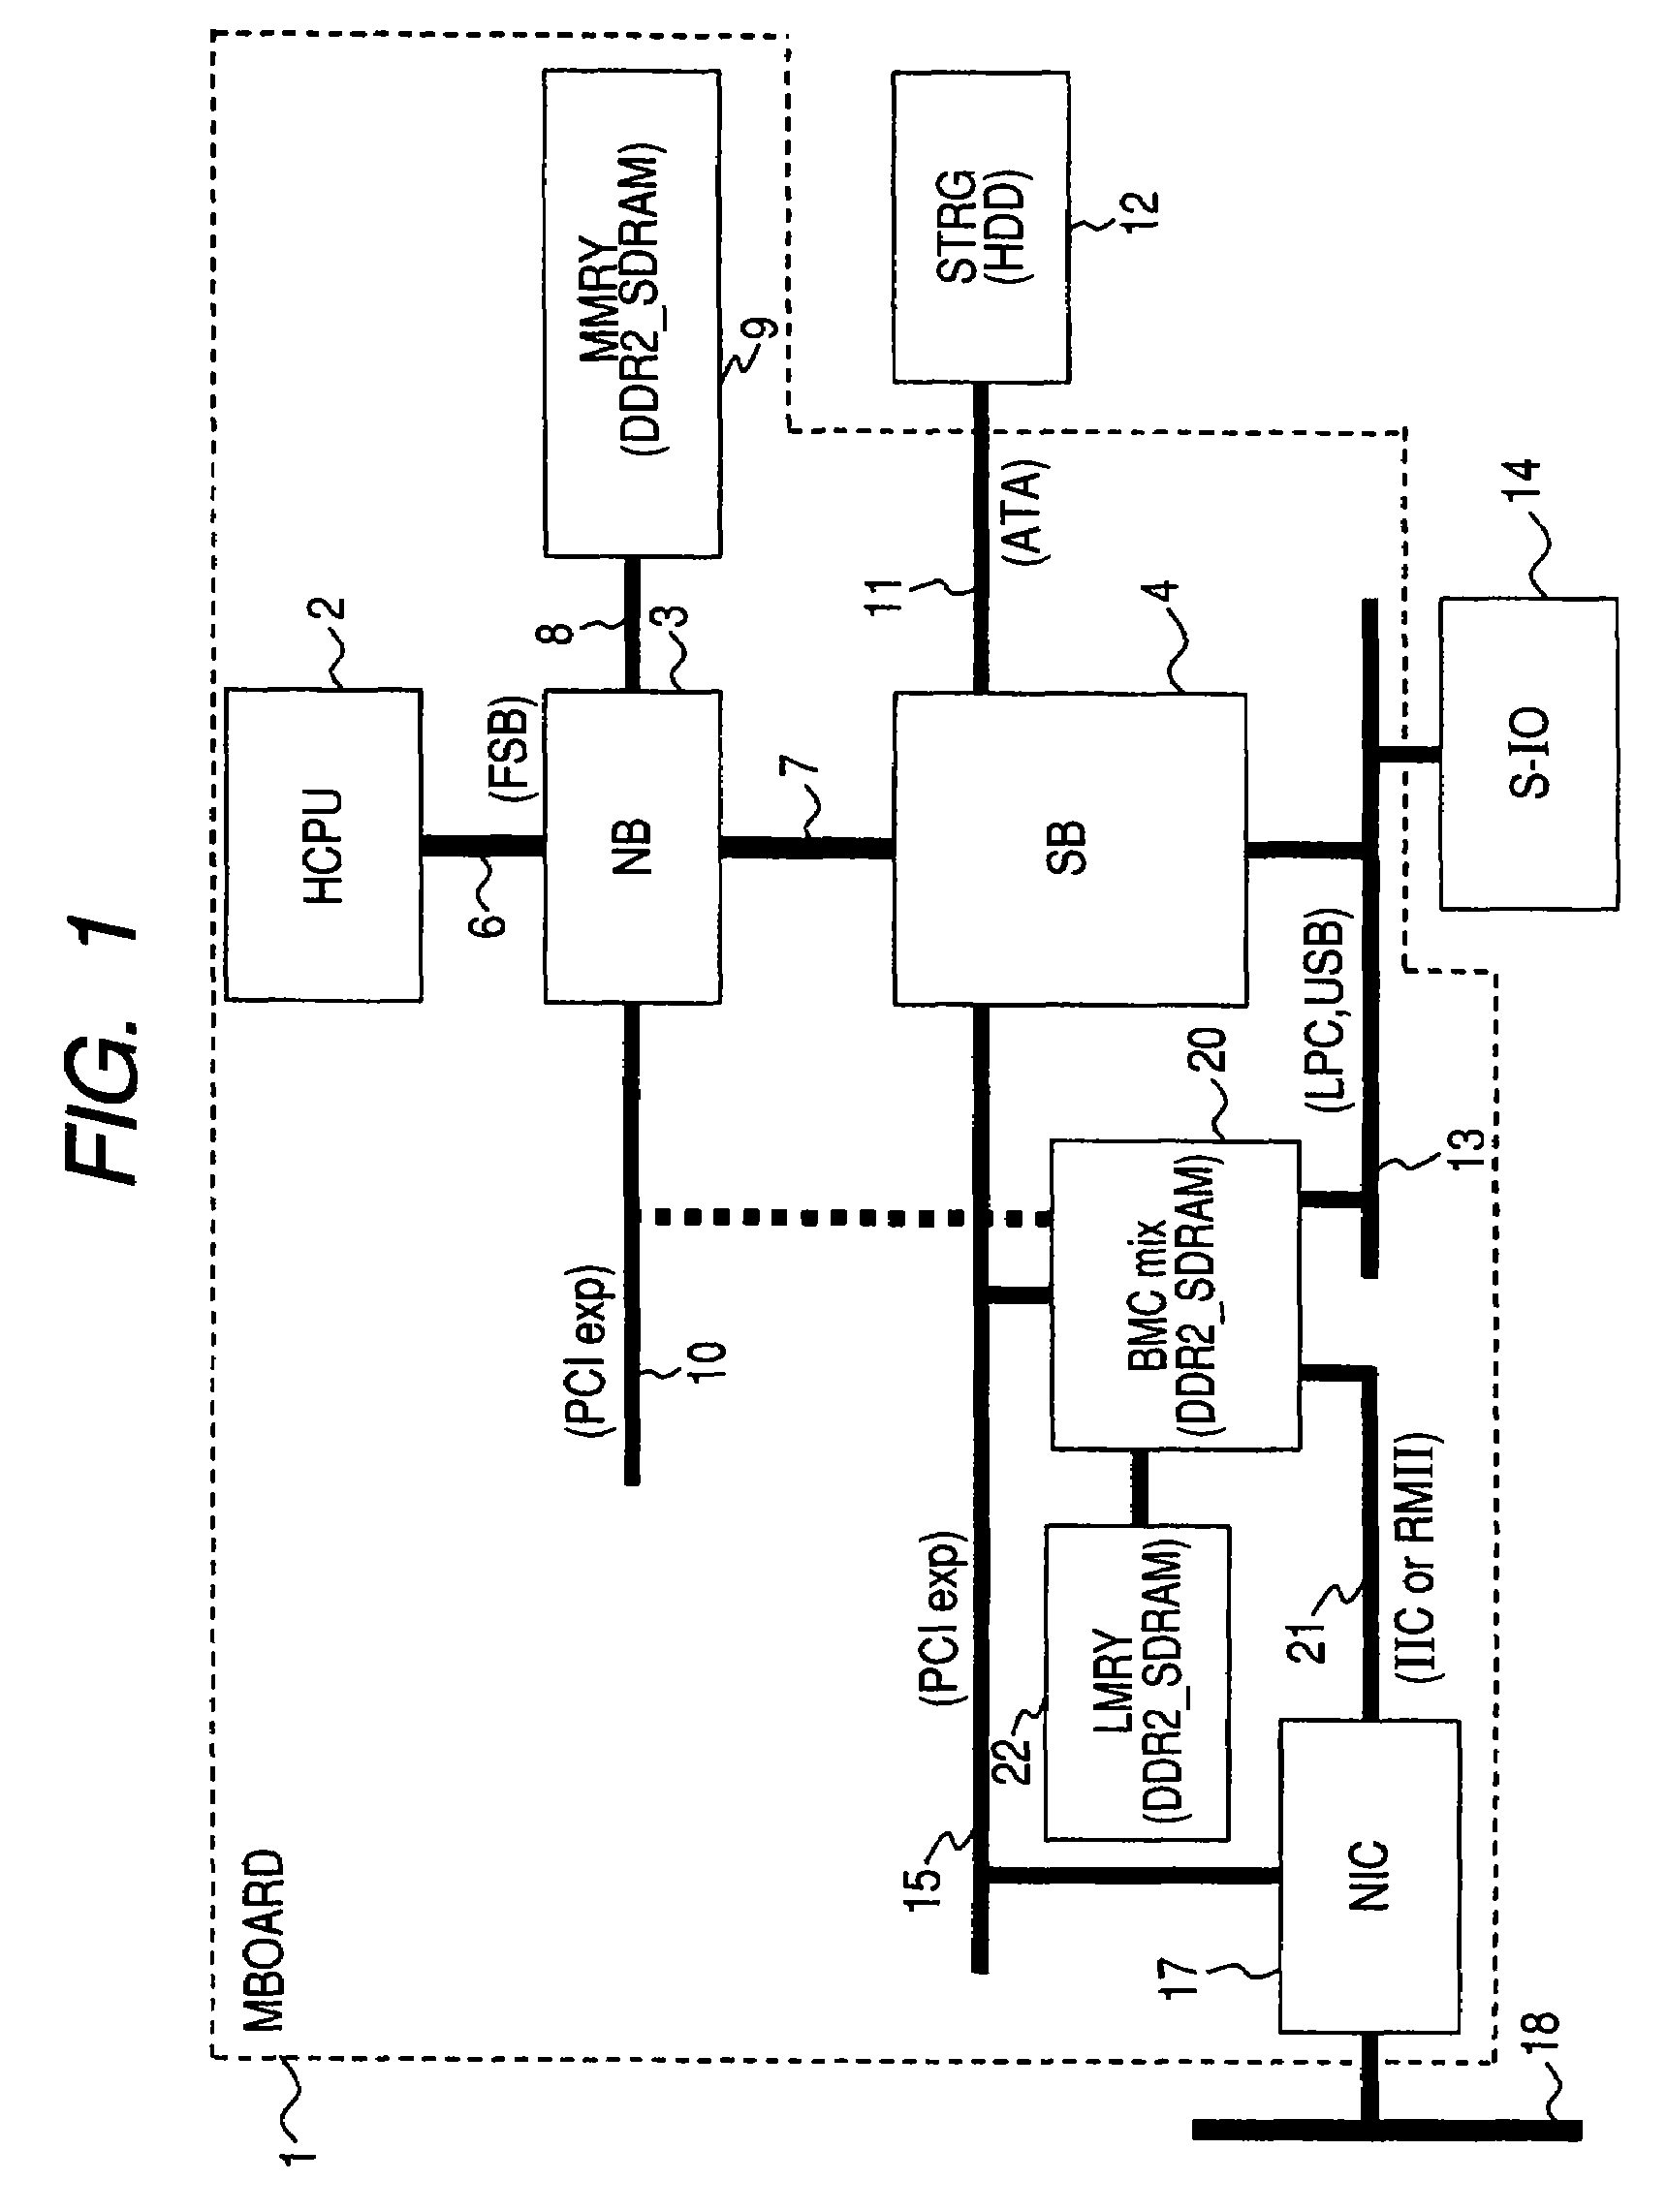 Semiconductor integrated circuit and data processing system